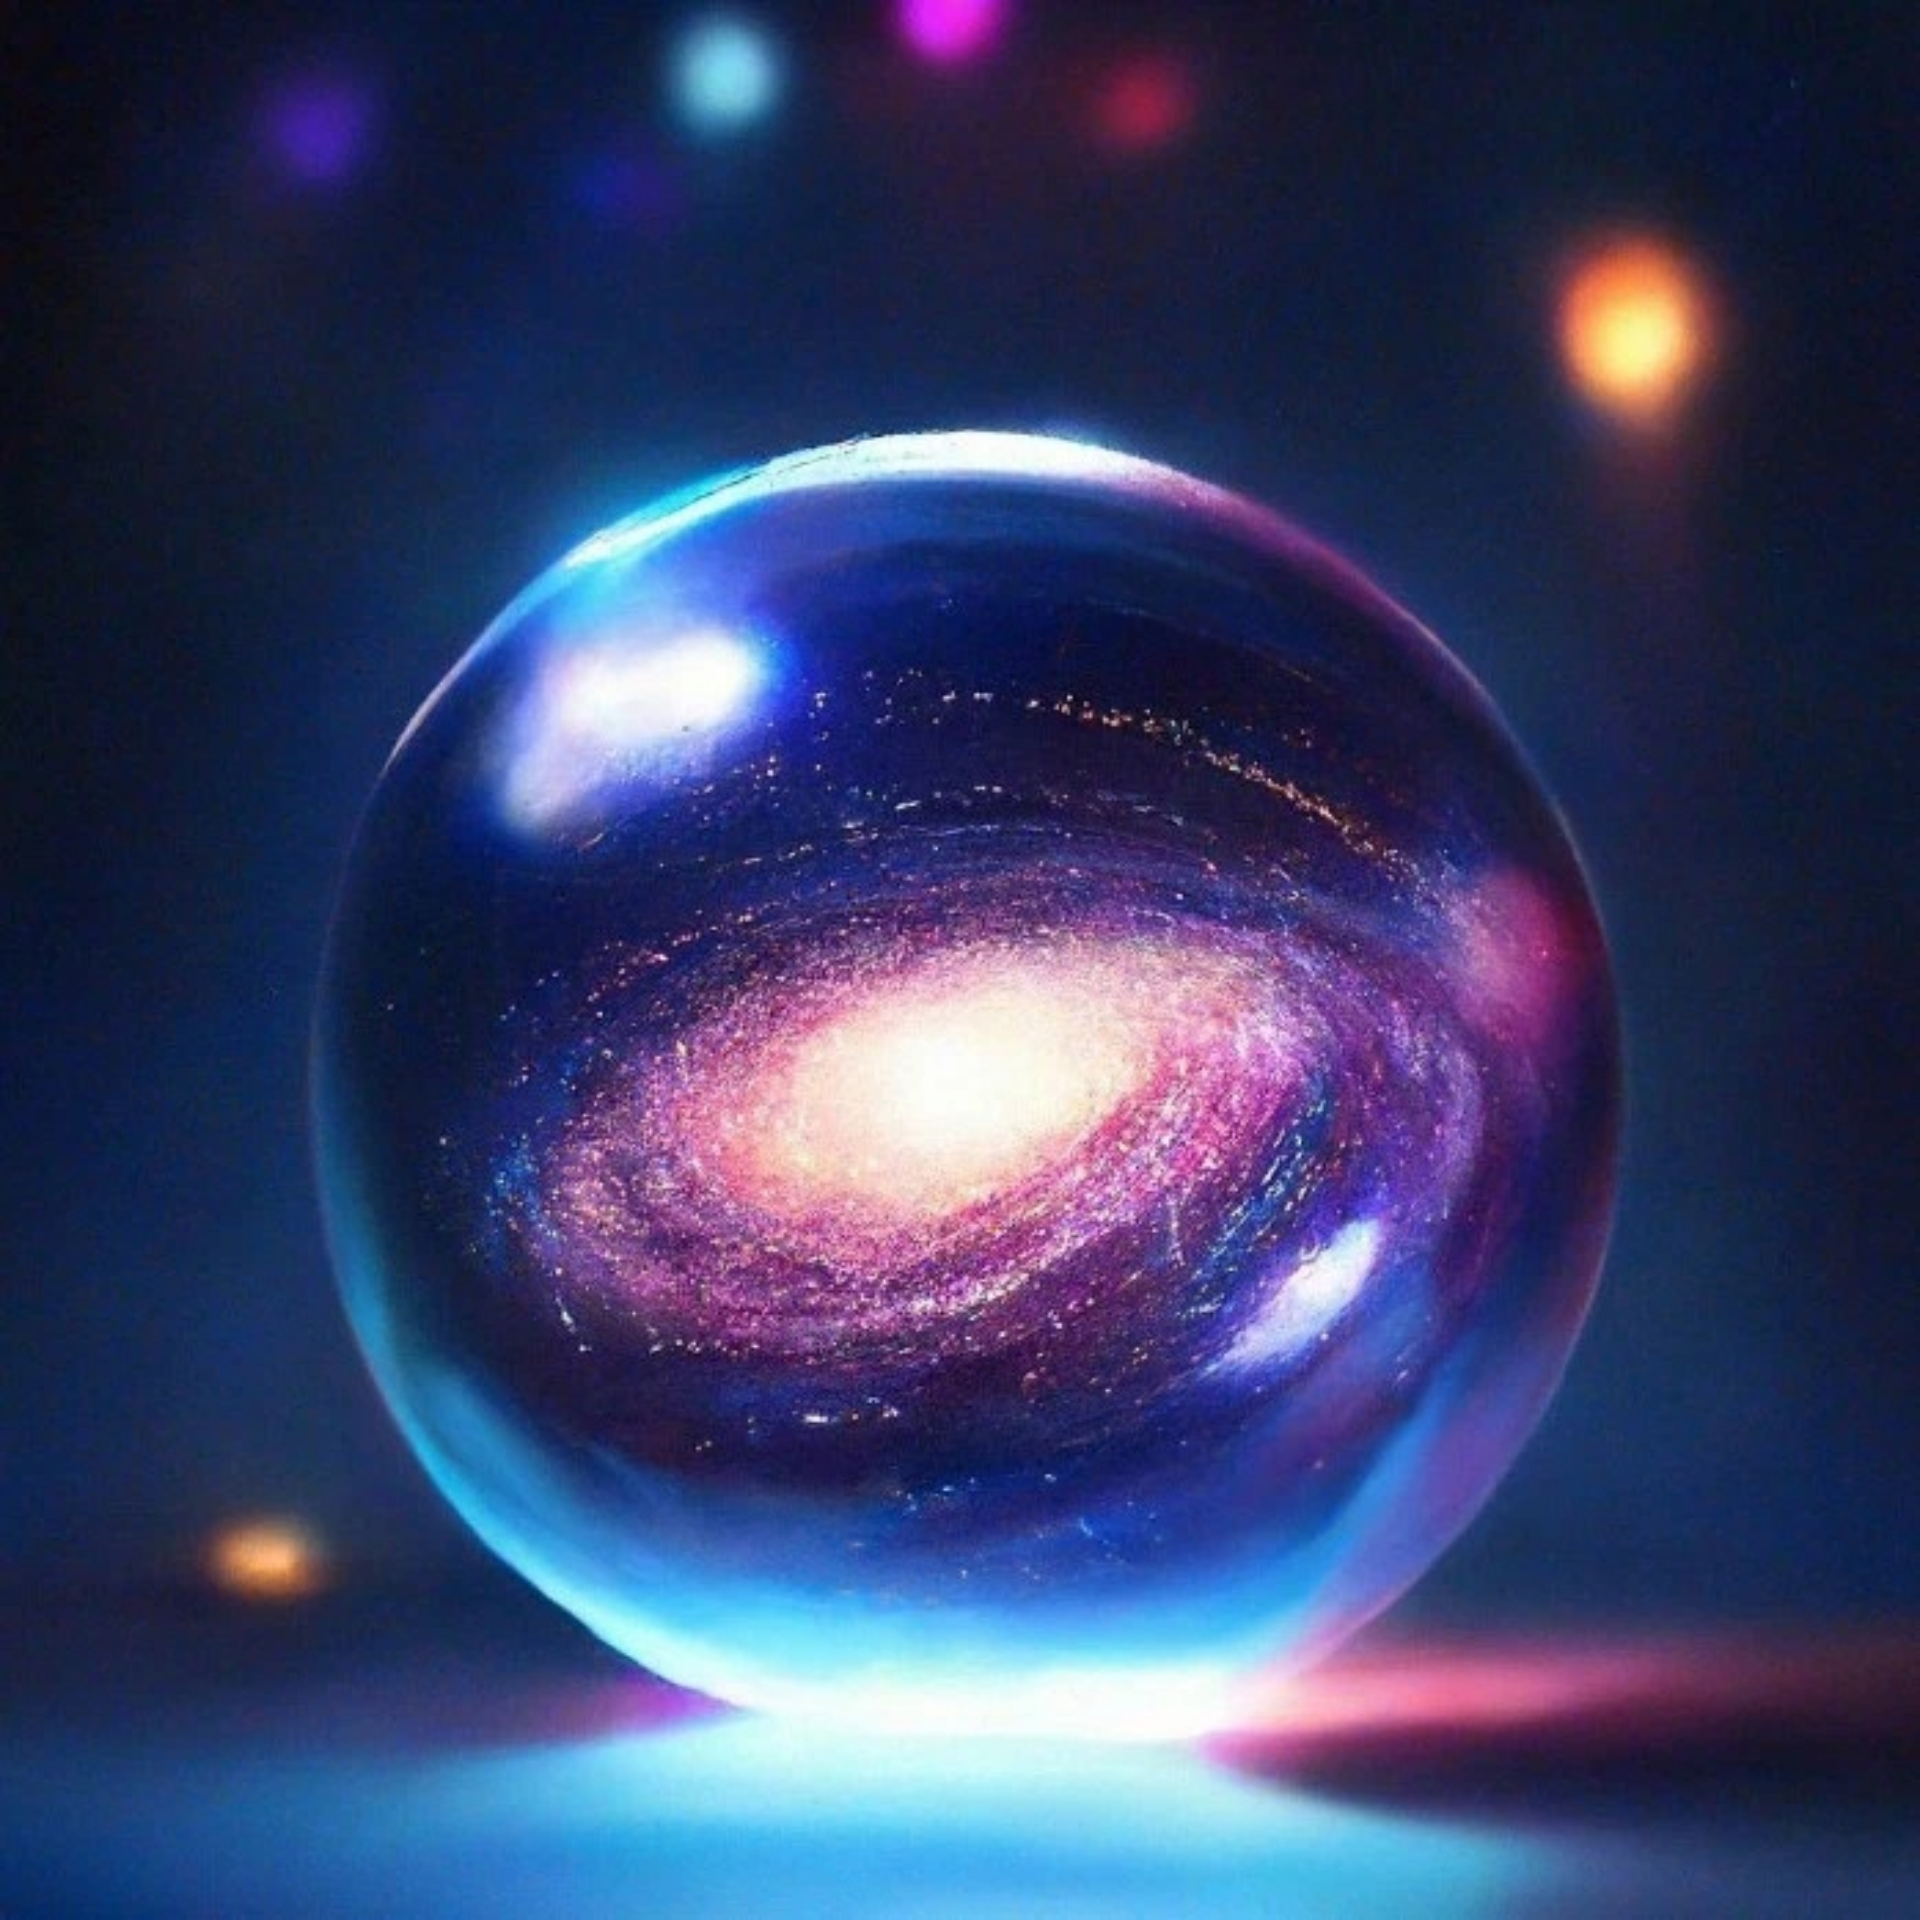 Free photo A galaxy in a glass ball